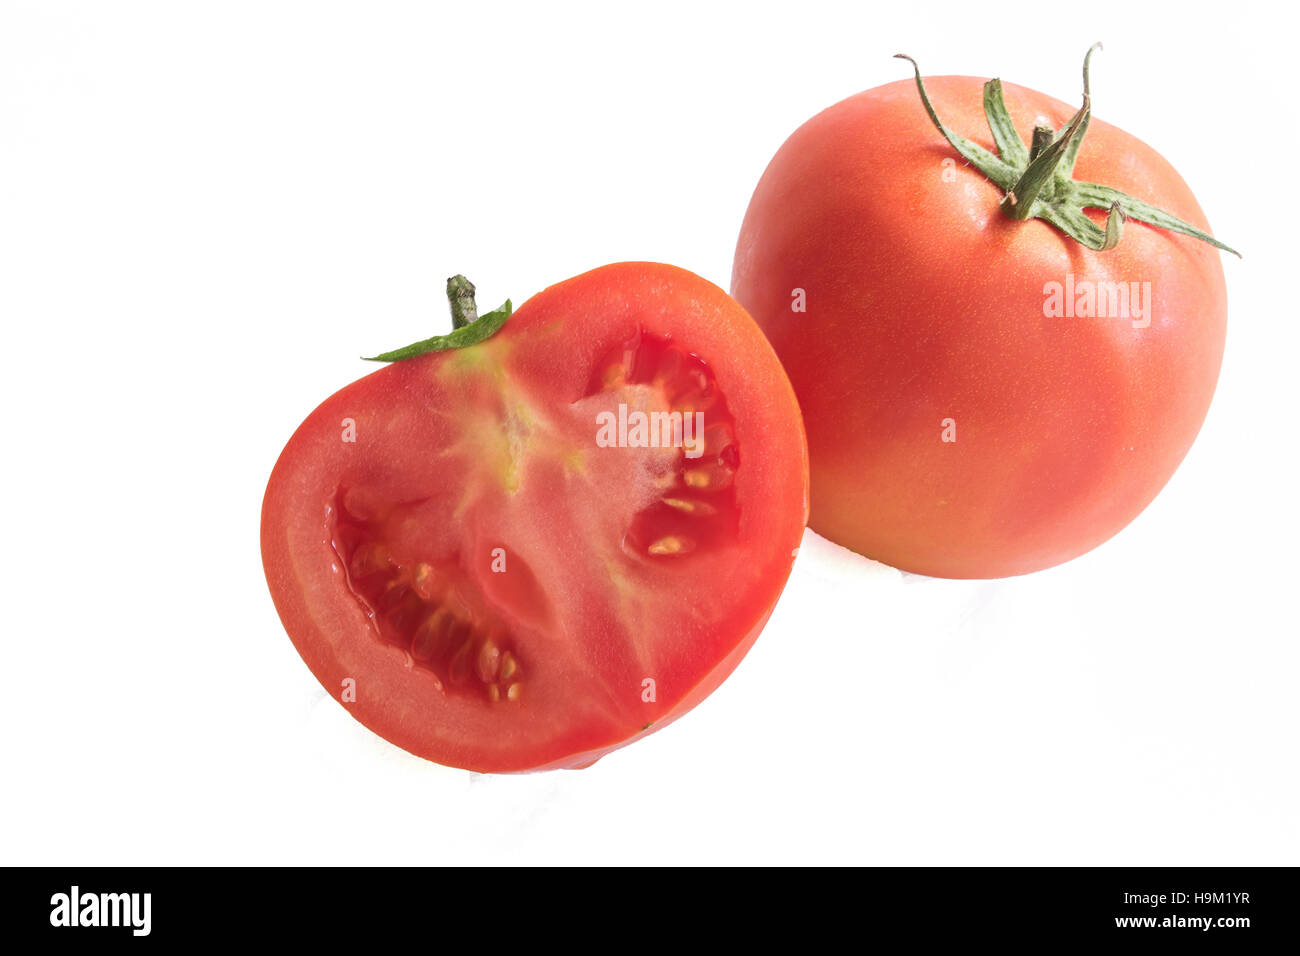 Fresh red tomato with green stem on white background, with clipping path Stock Photo